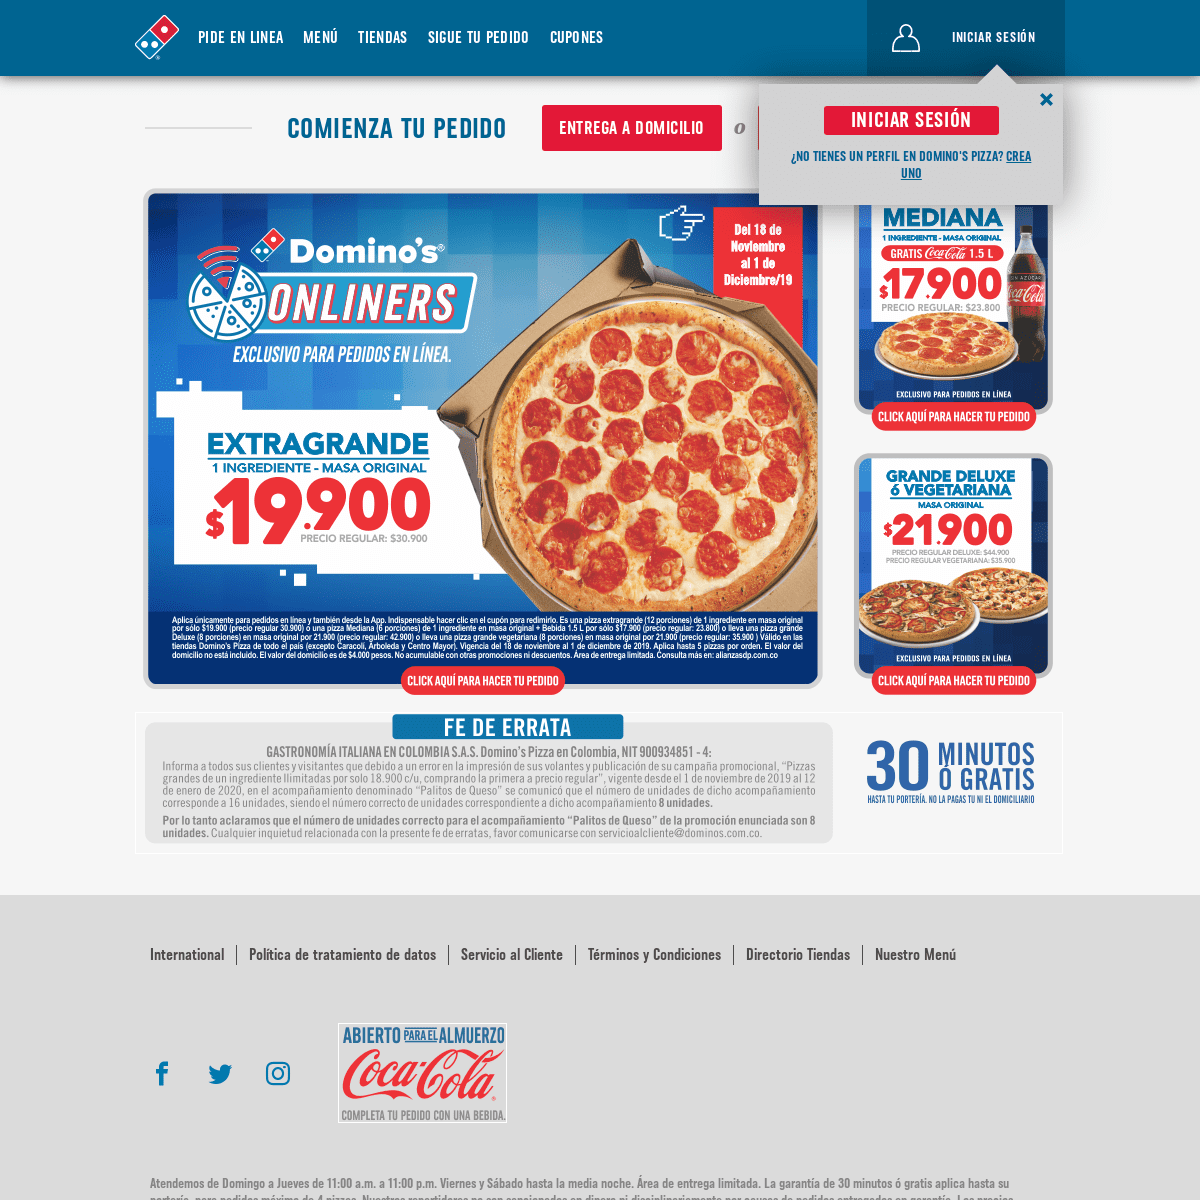 A complete backup of dominos.com.co